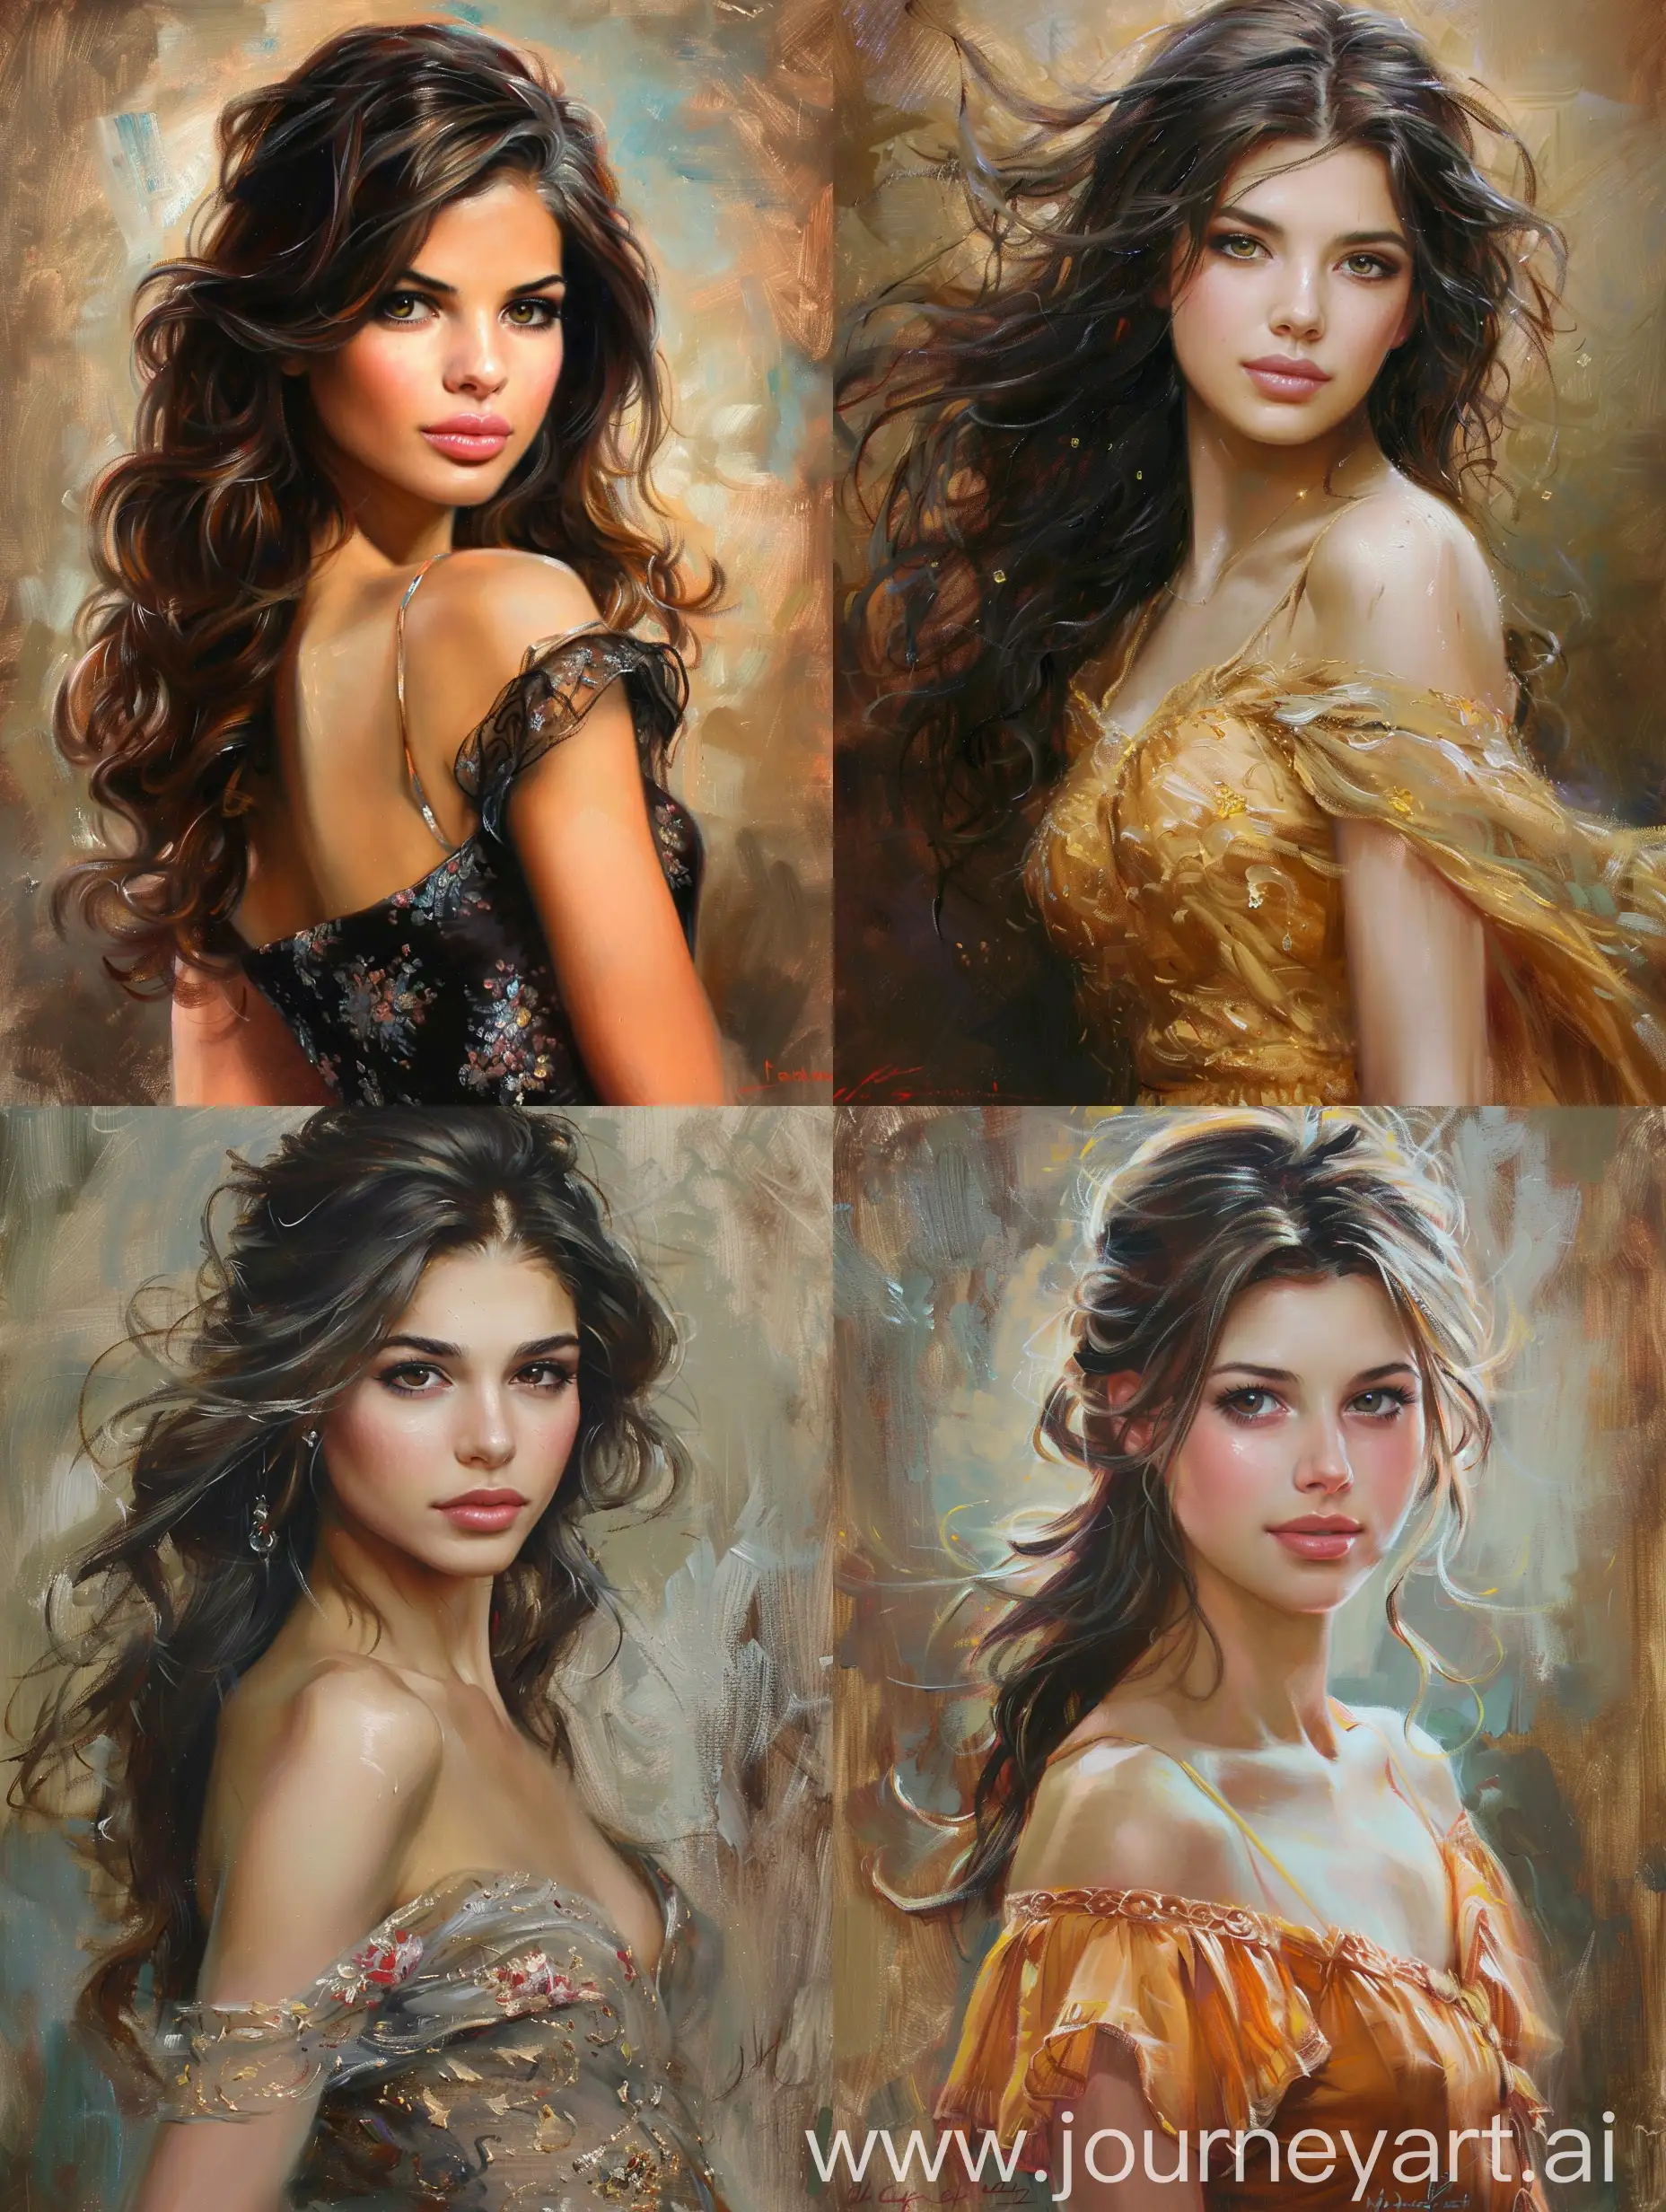 Elegant-Woman-in-Flowing-Dress-Realistic-Oil-Painting-with-Mesmerizing-Eyes